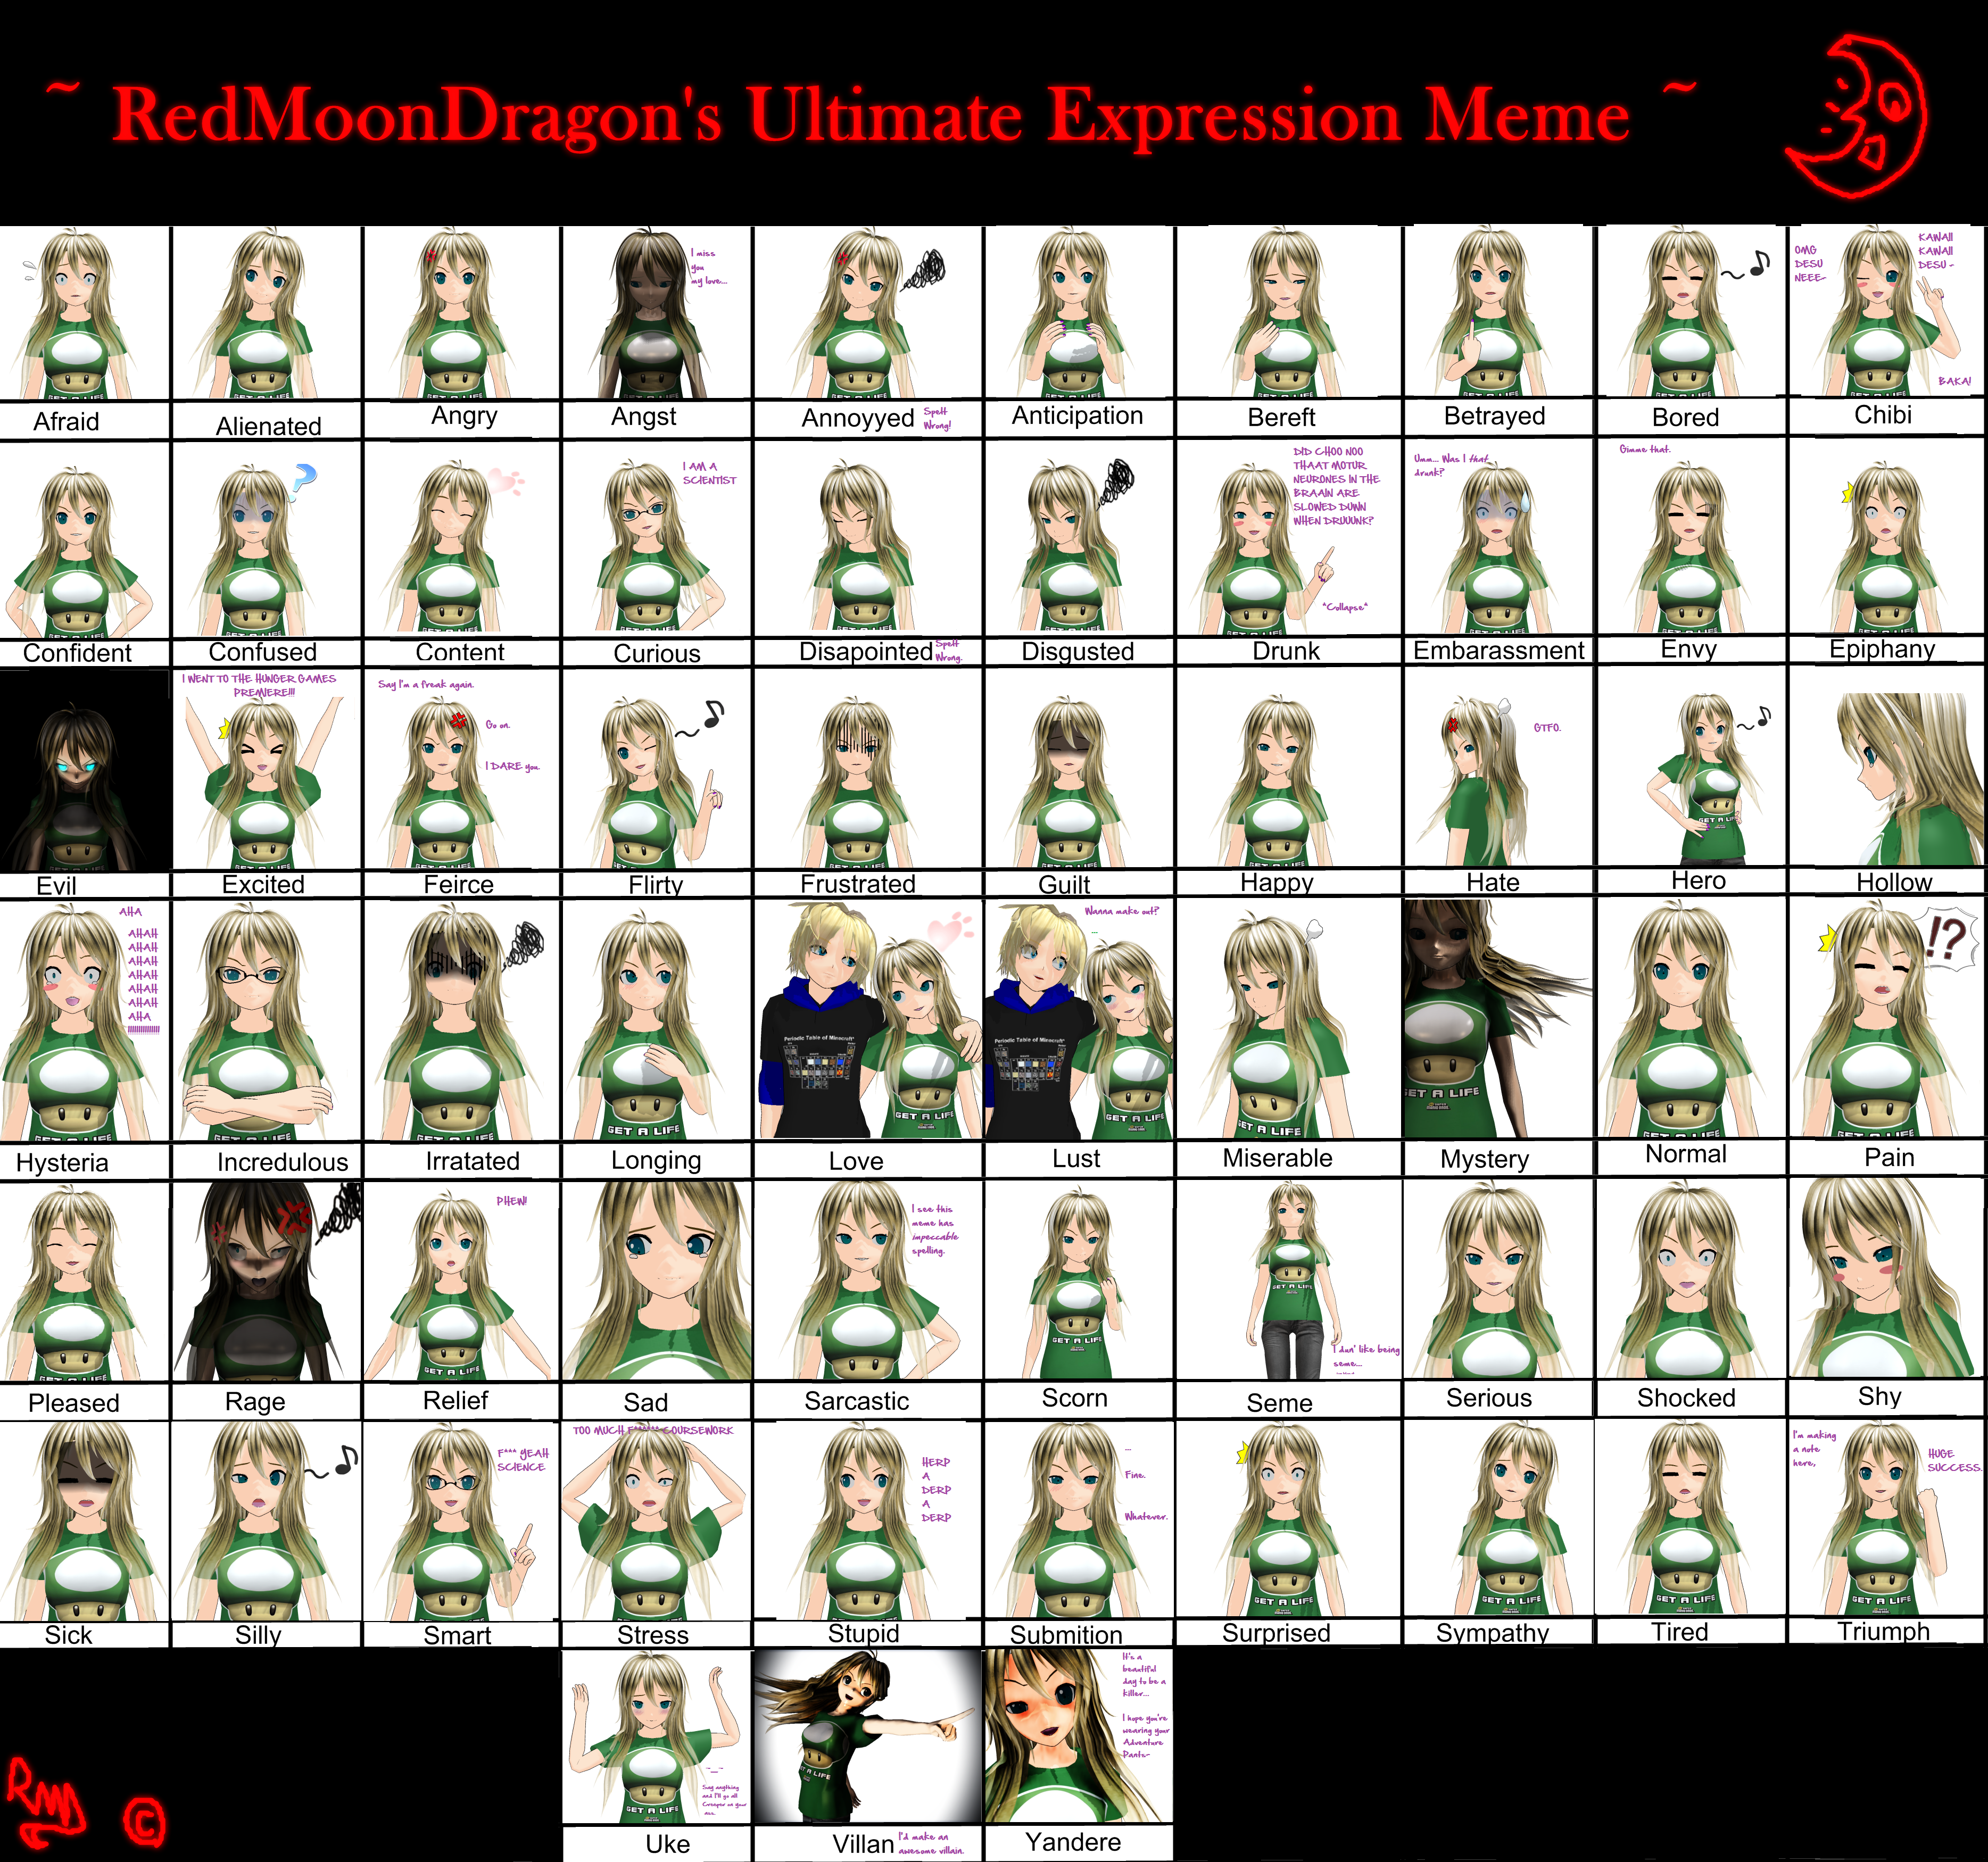 The Ultimate Expression Meme - Selfie!